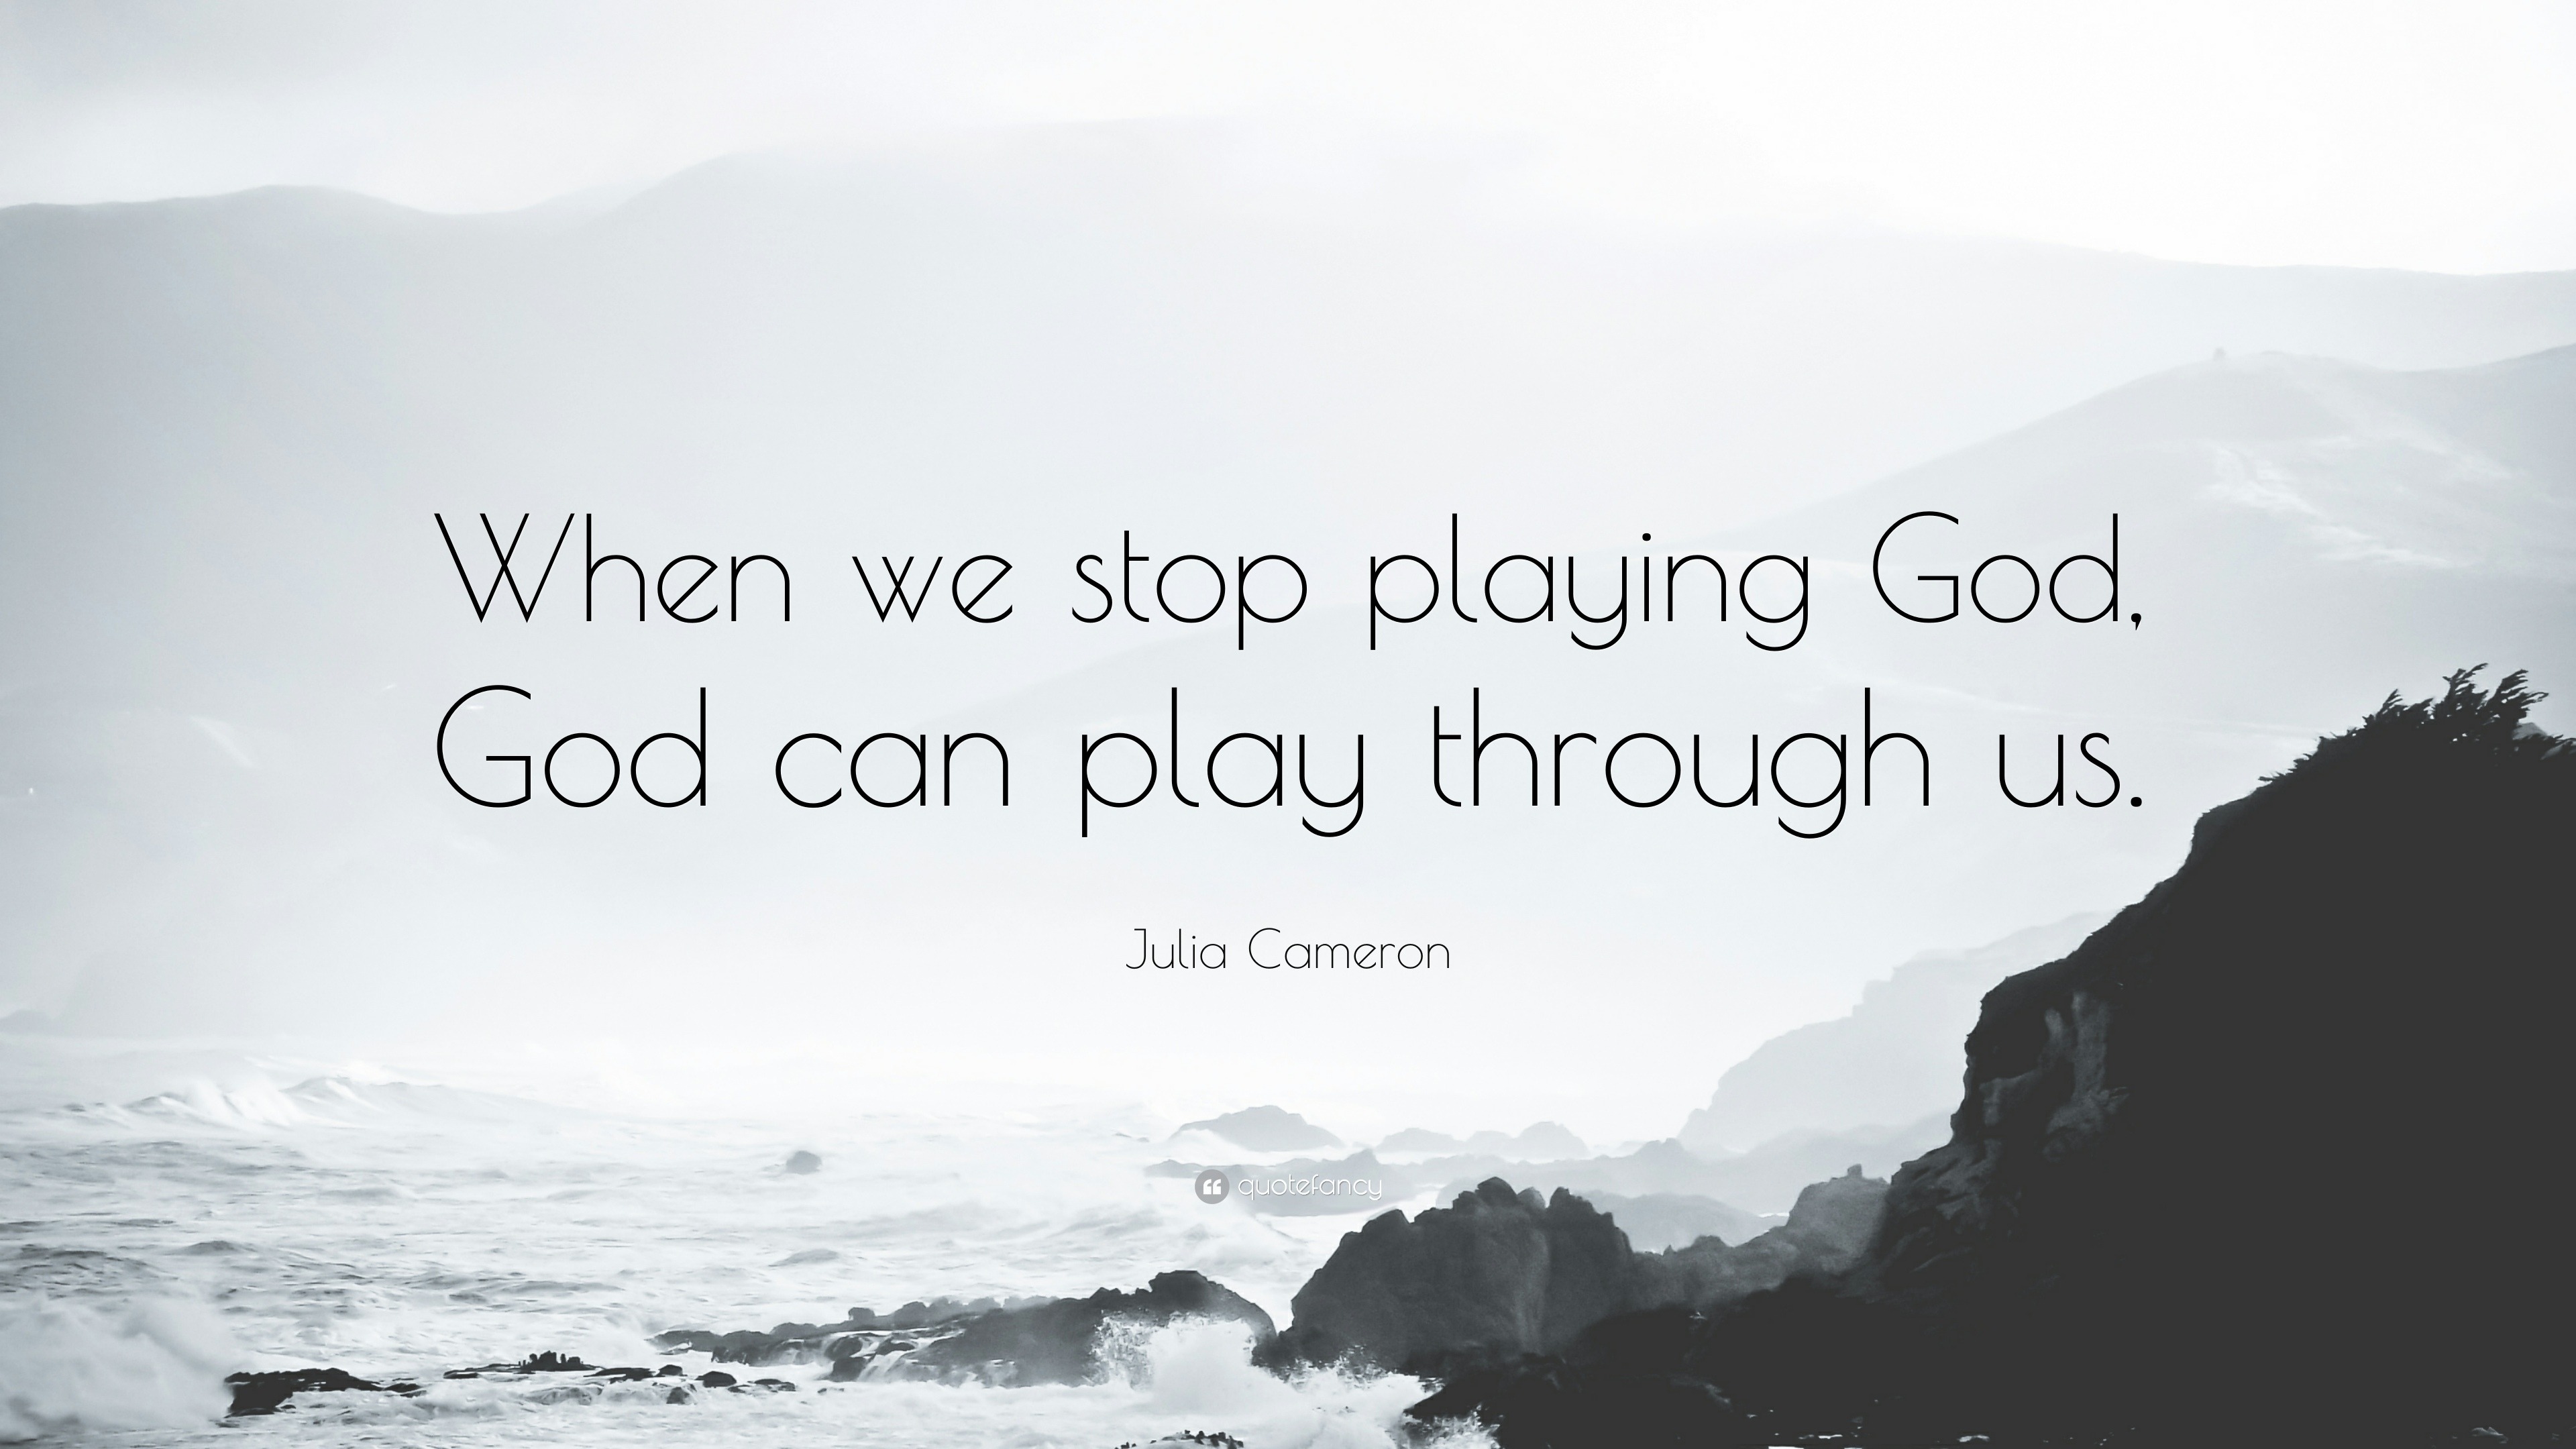 Julia Cameron quote: When we stop playing God, God can play through us.